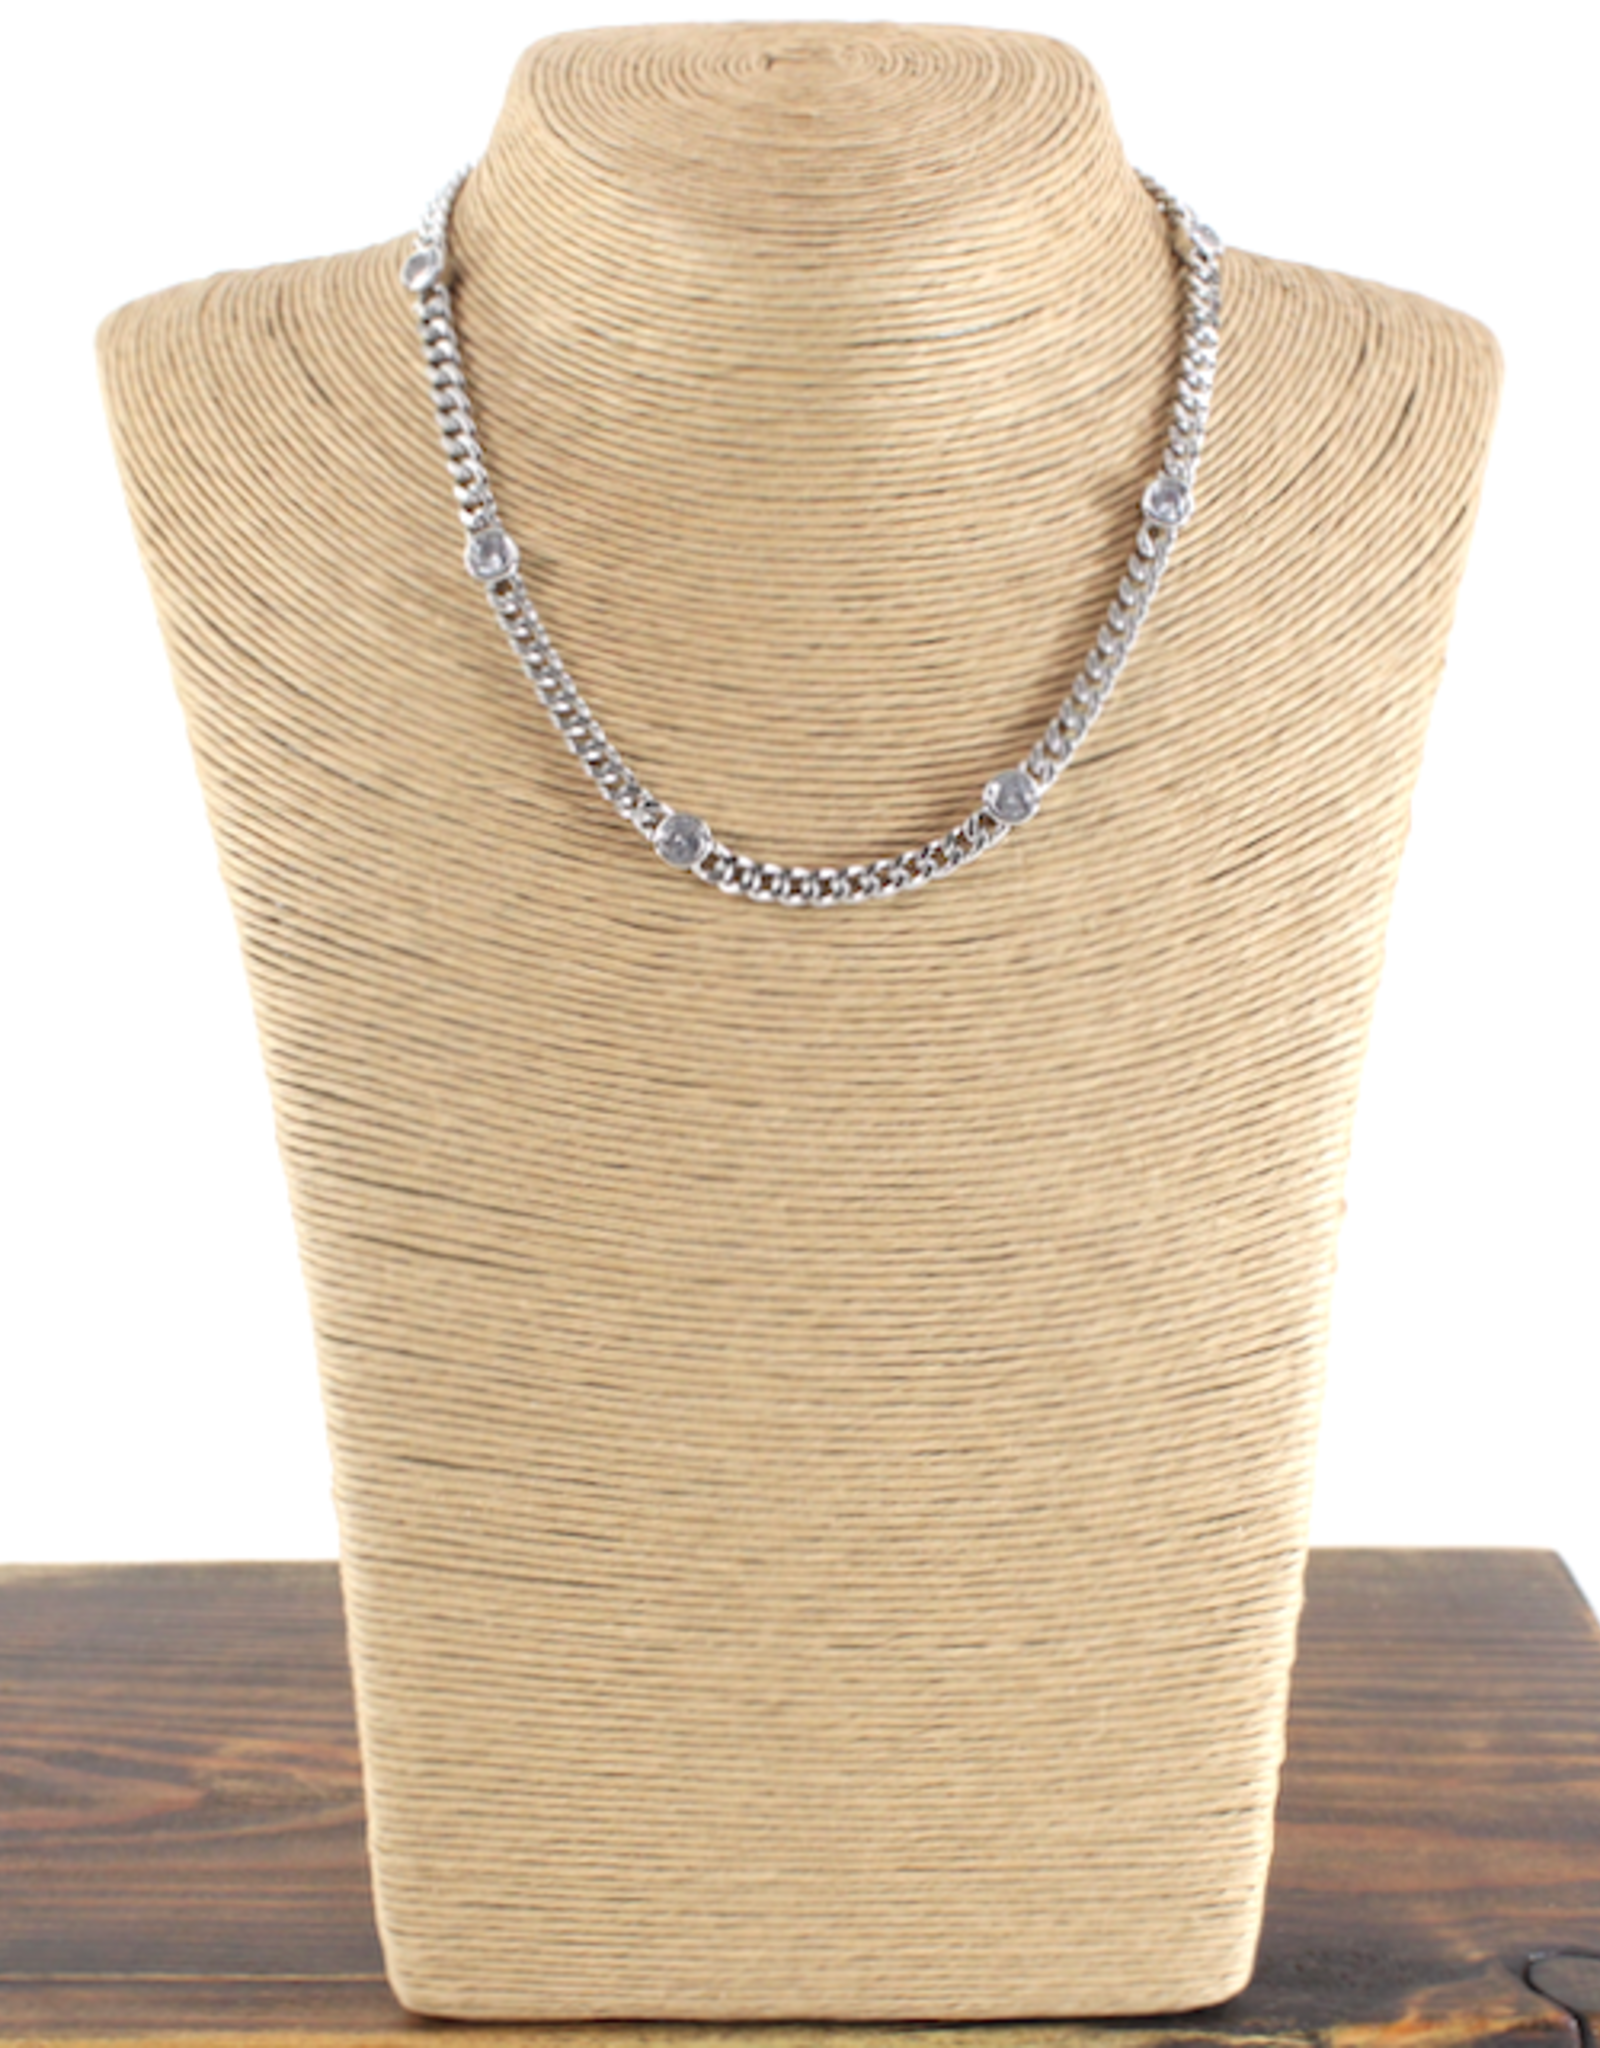 Silver Metal Alloy Short Chain w/White Crystals Necklace